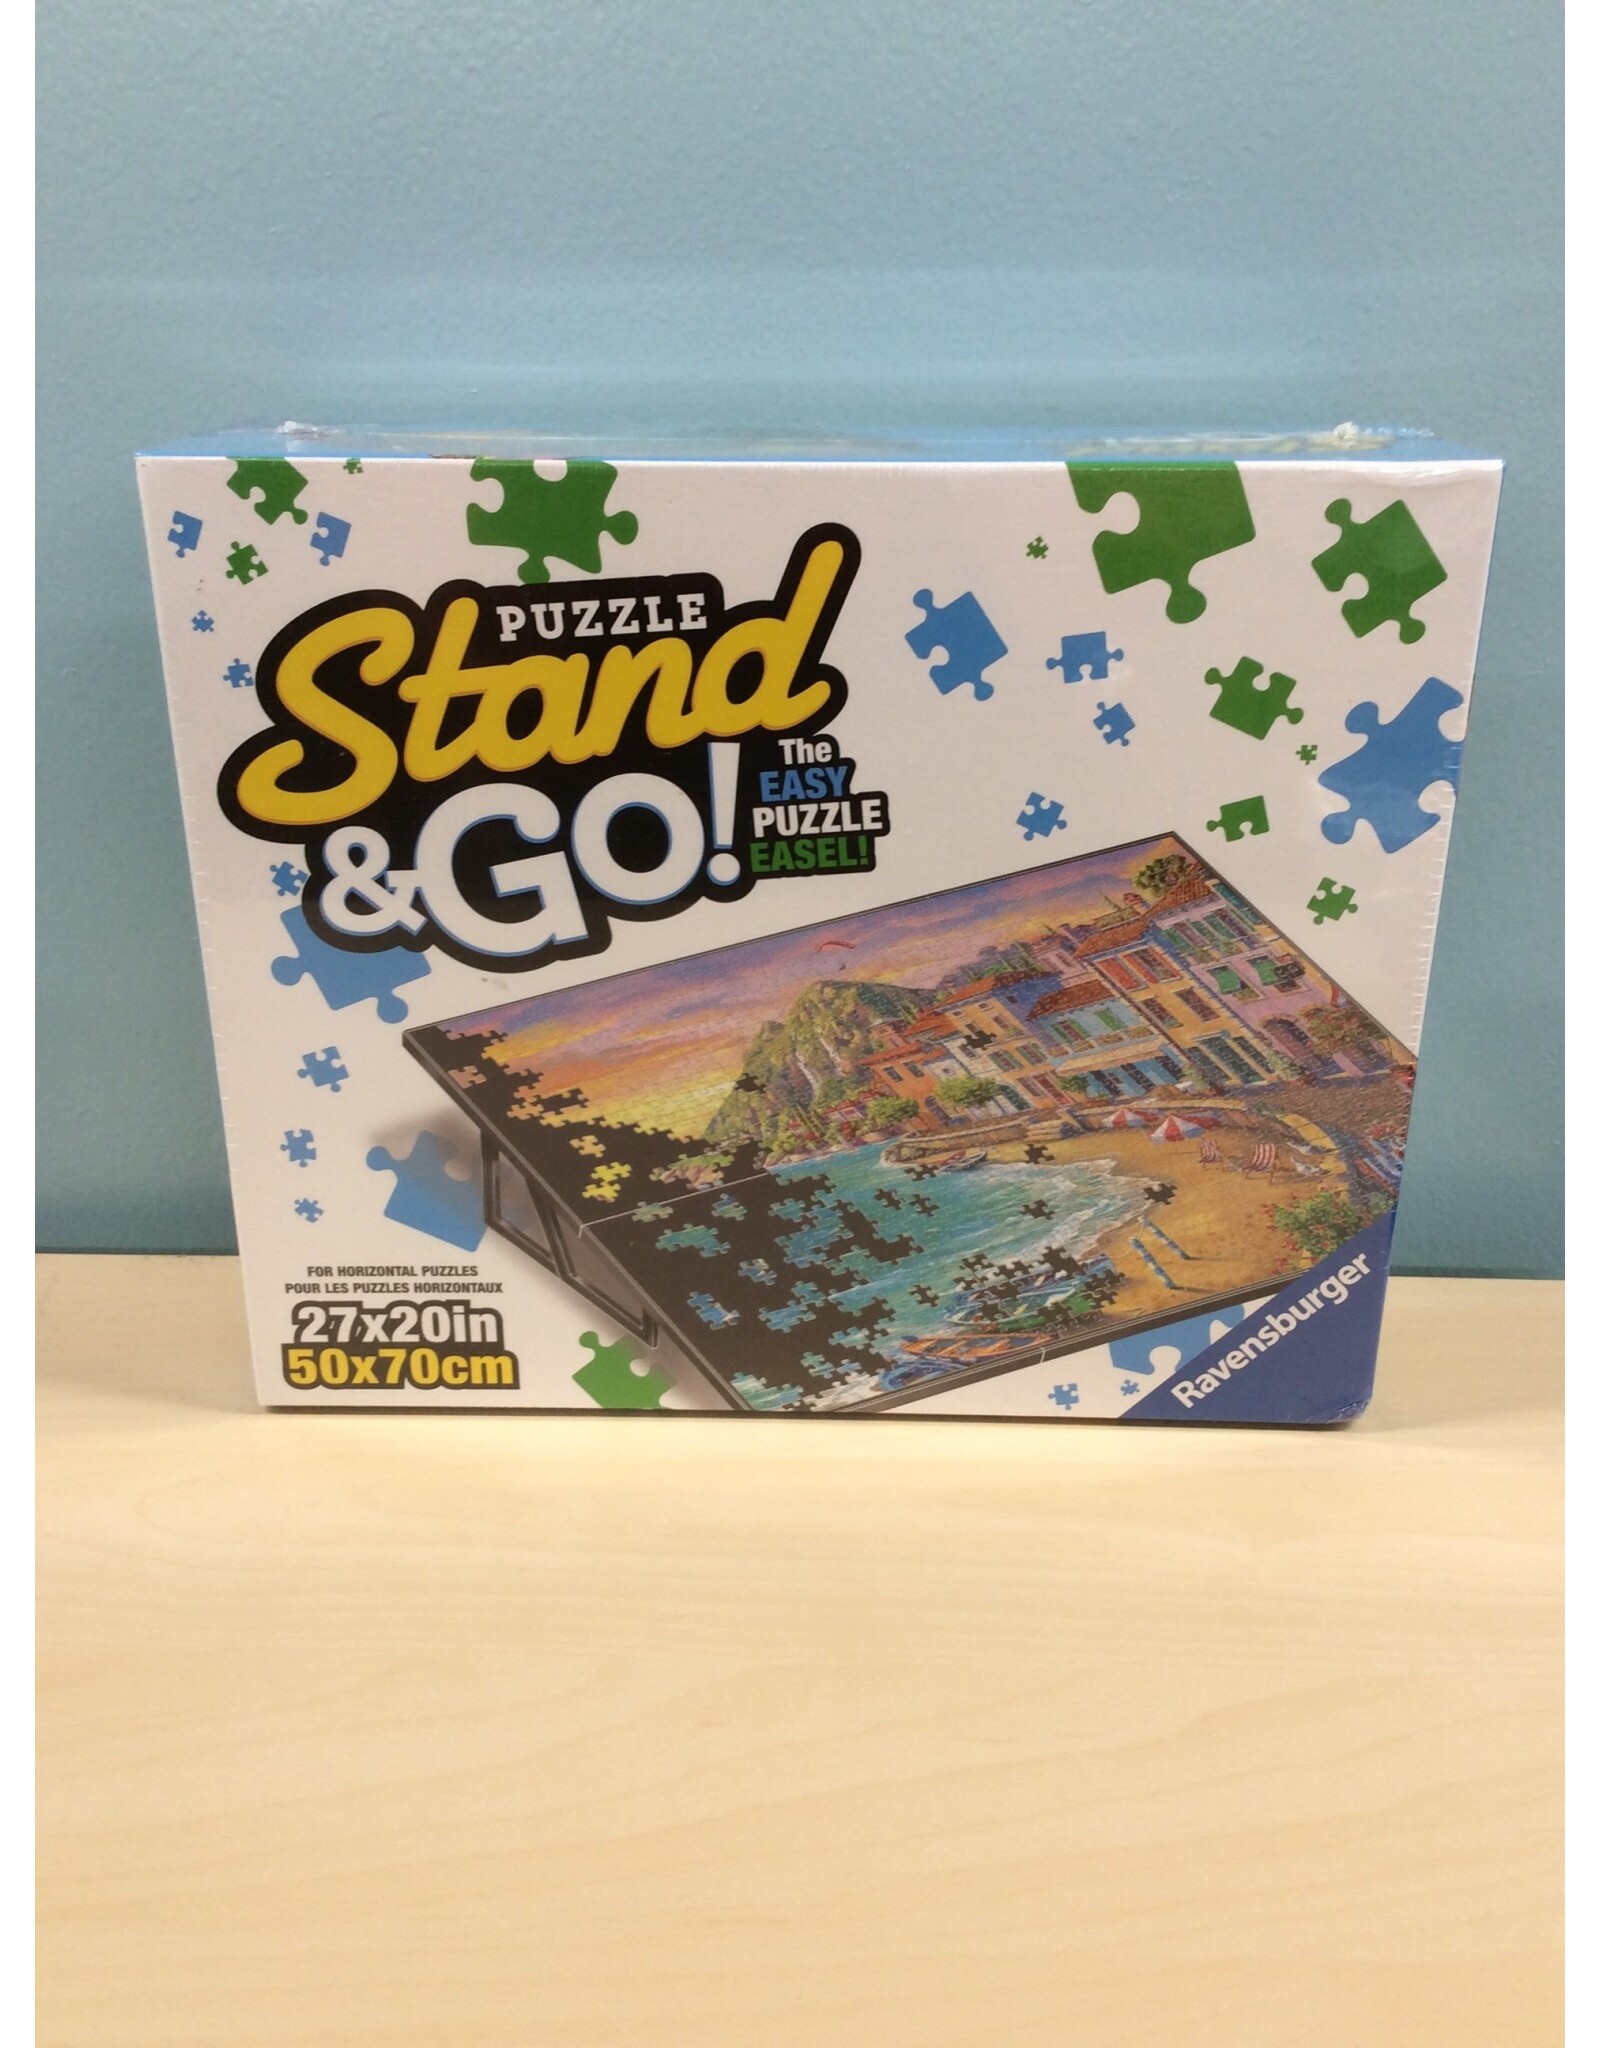 Ravensburger Puzzle Stand & Go! Accessory